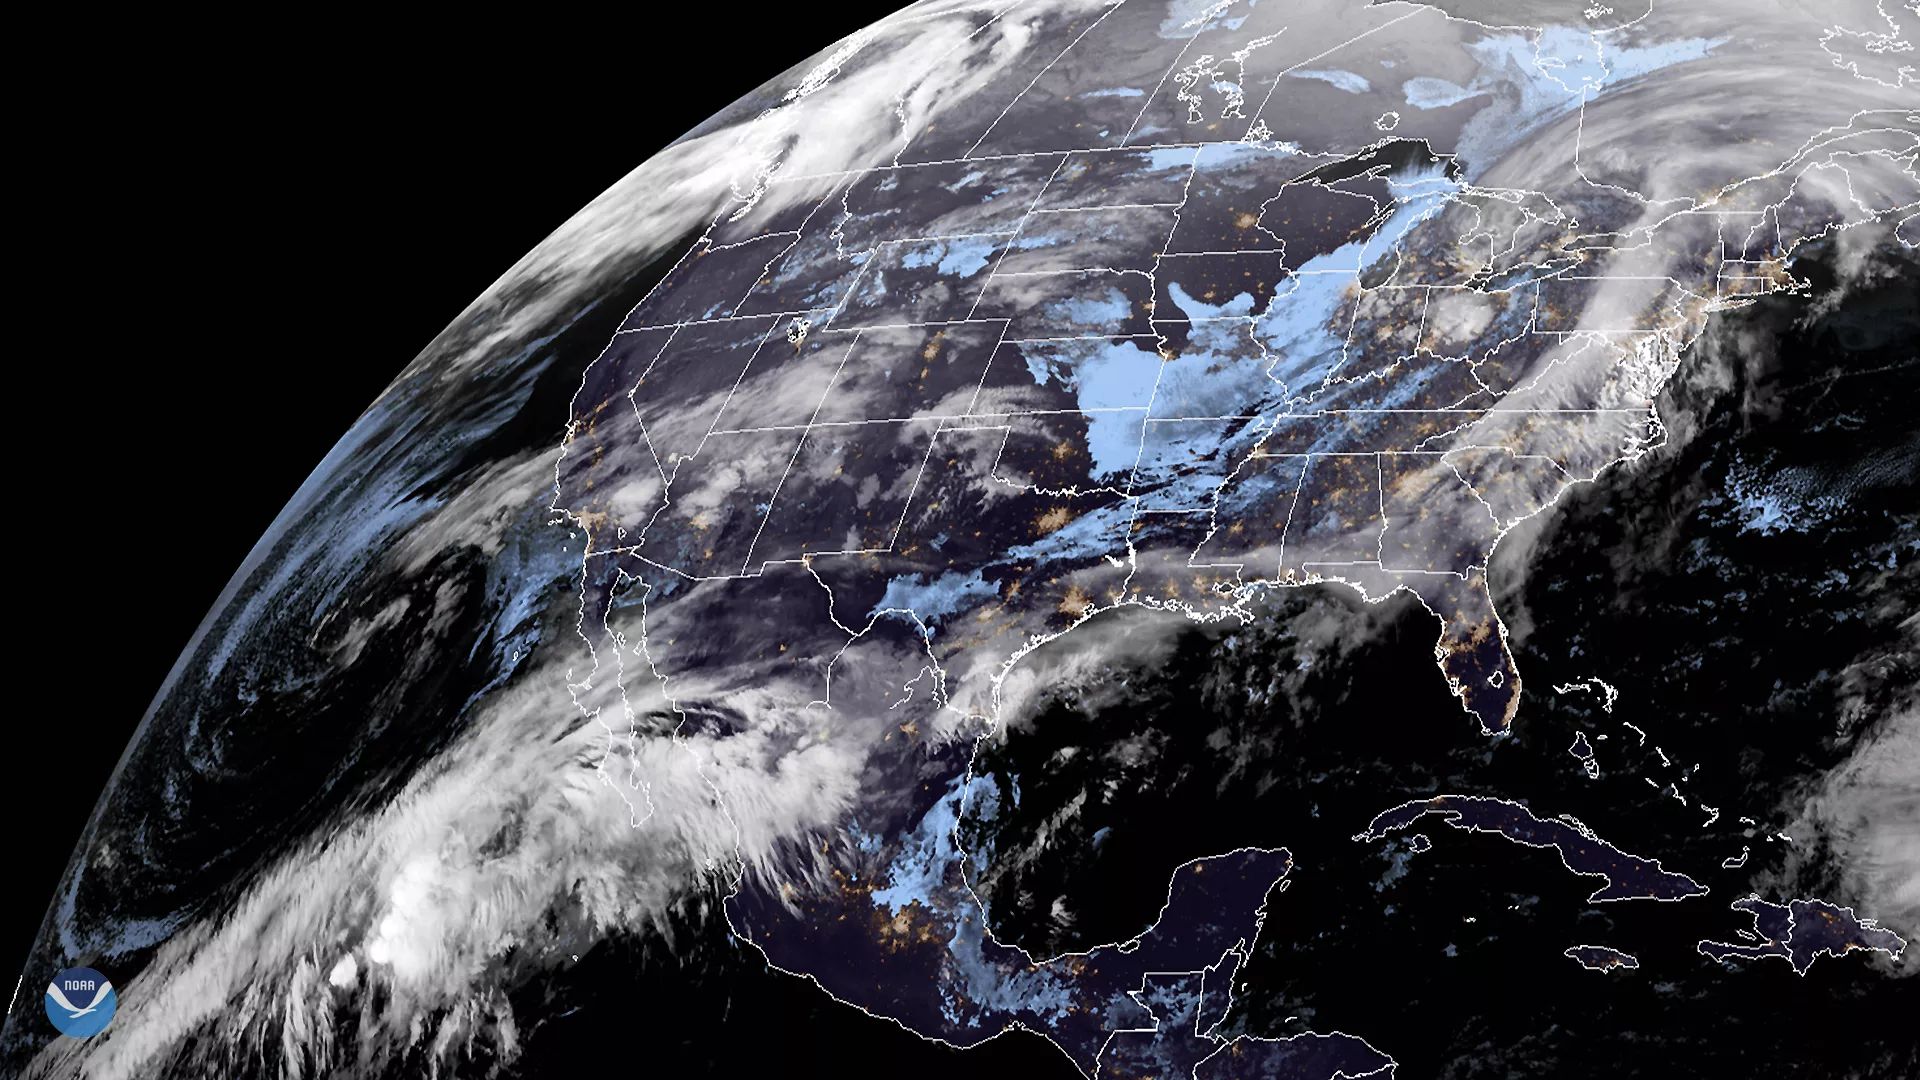 The GOES-East satellite view of an atmospheric river (or AR) flowing up from the South Pacific, setting up across the Gulf of Mexico and into the U.S. on March 2020.